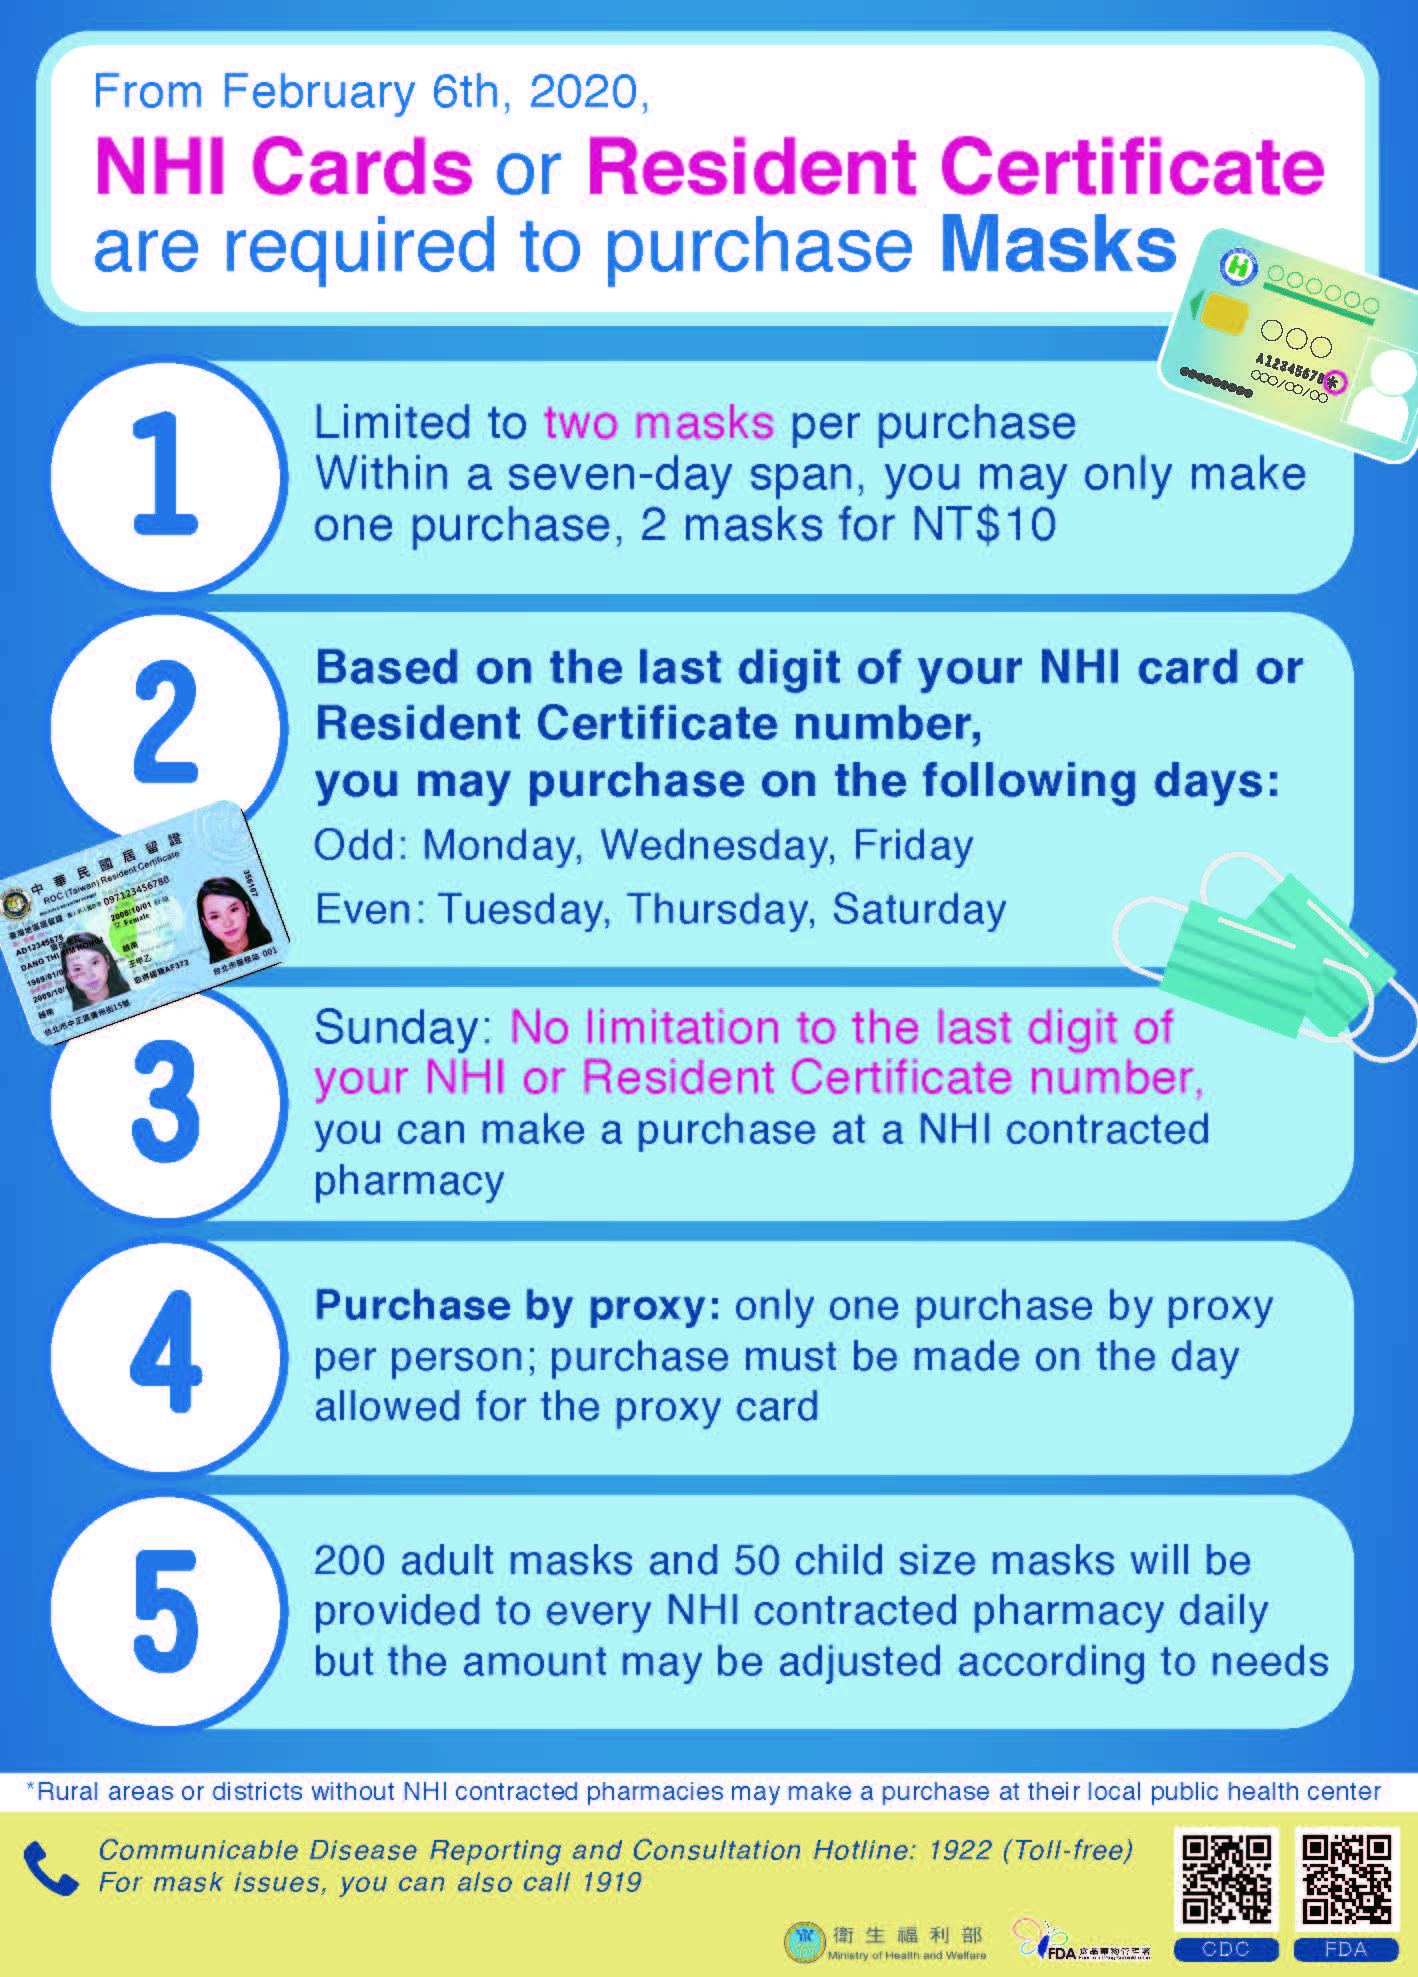 NHI Cards or Resident Certificate are required to purchase Masks